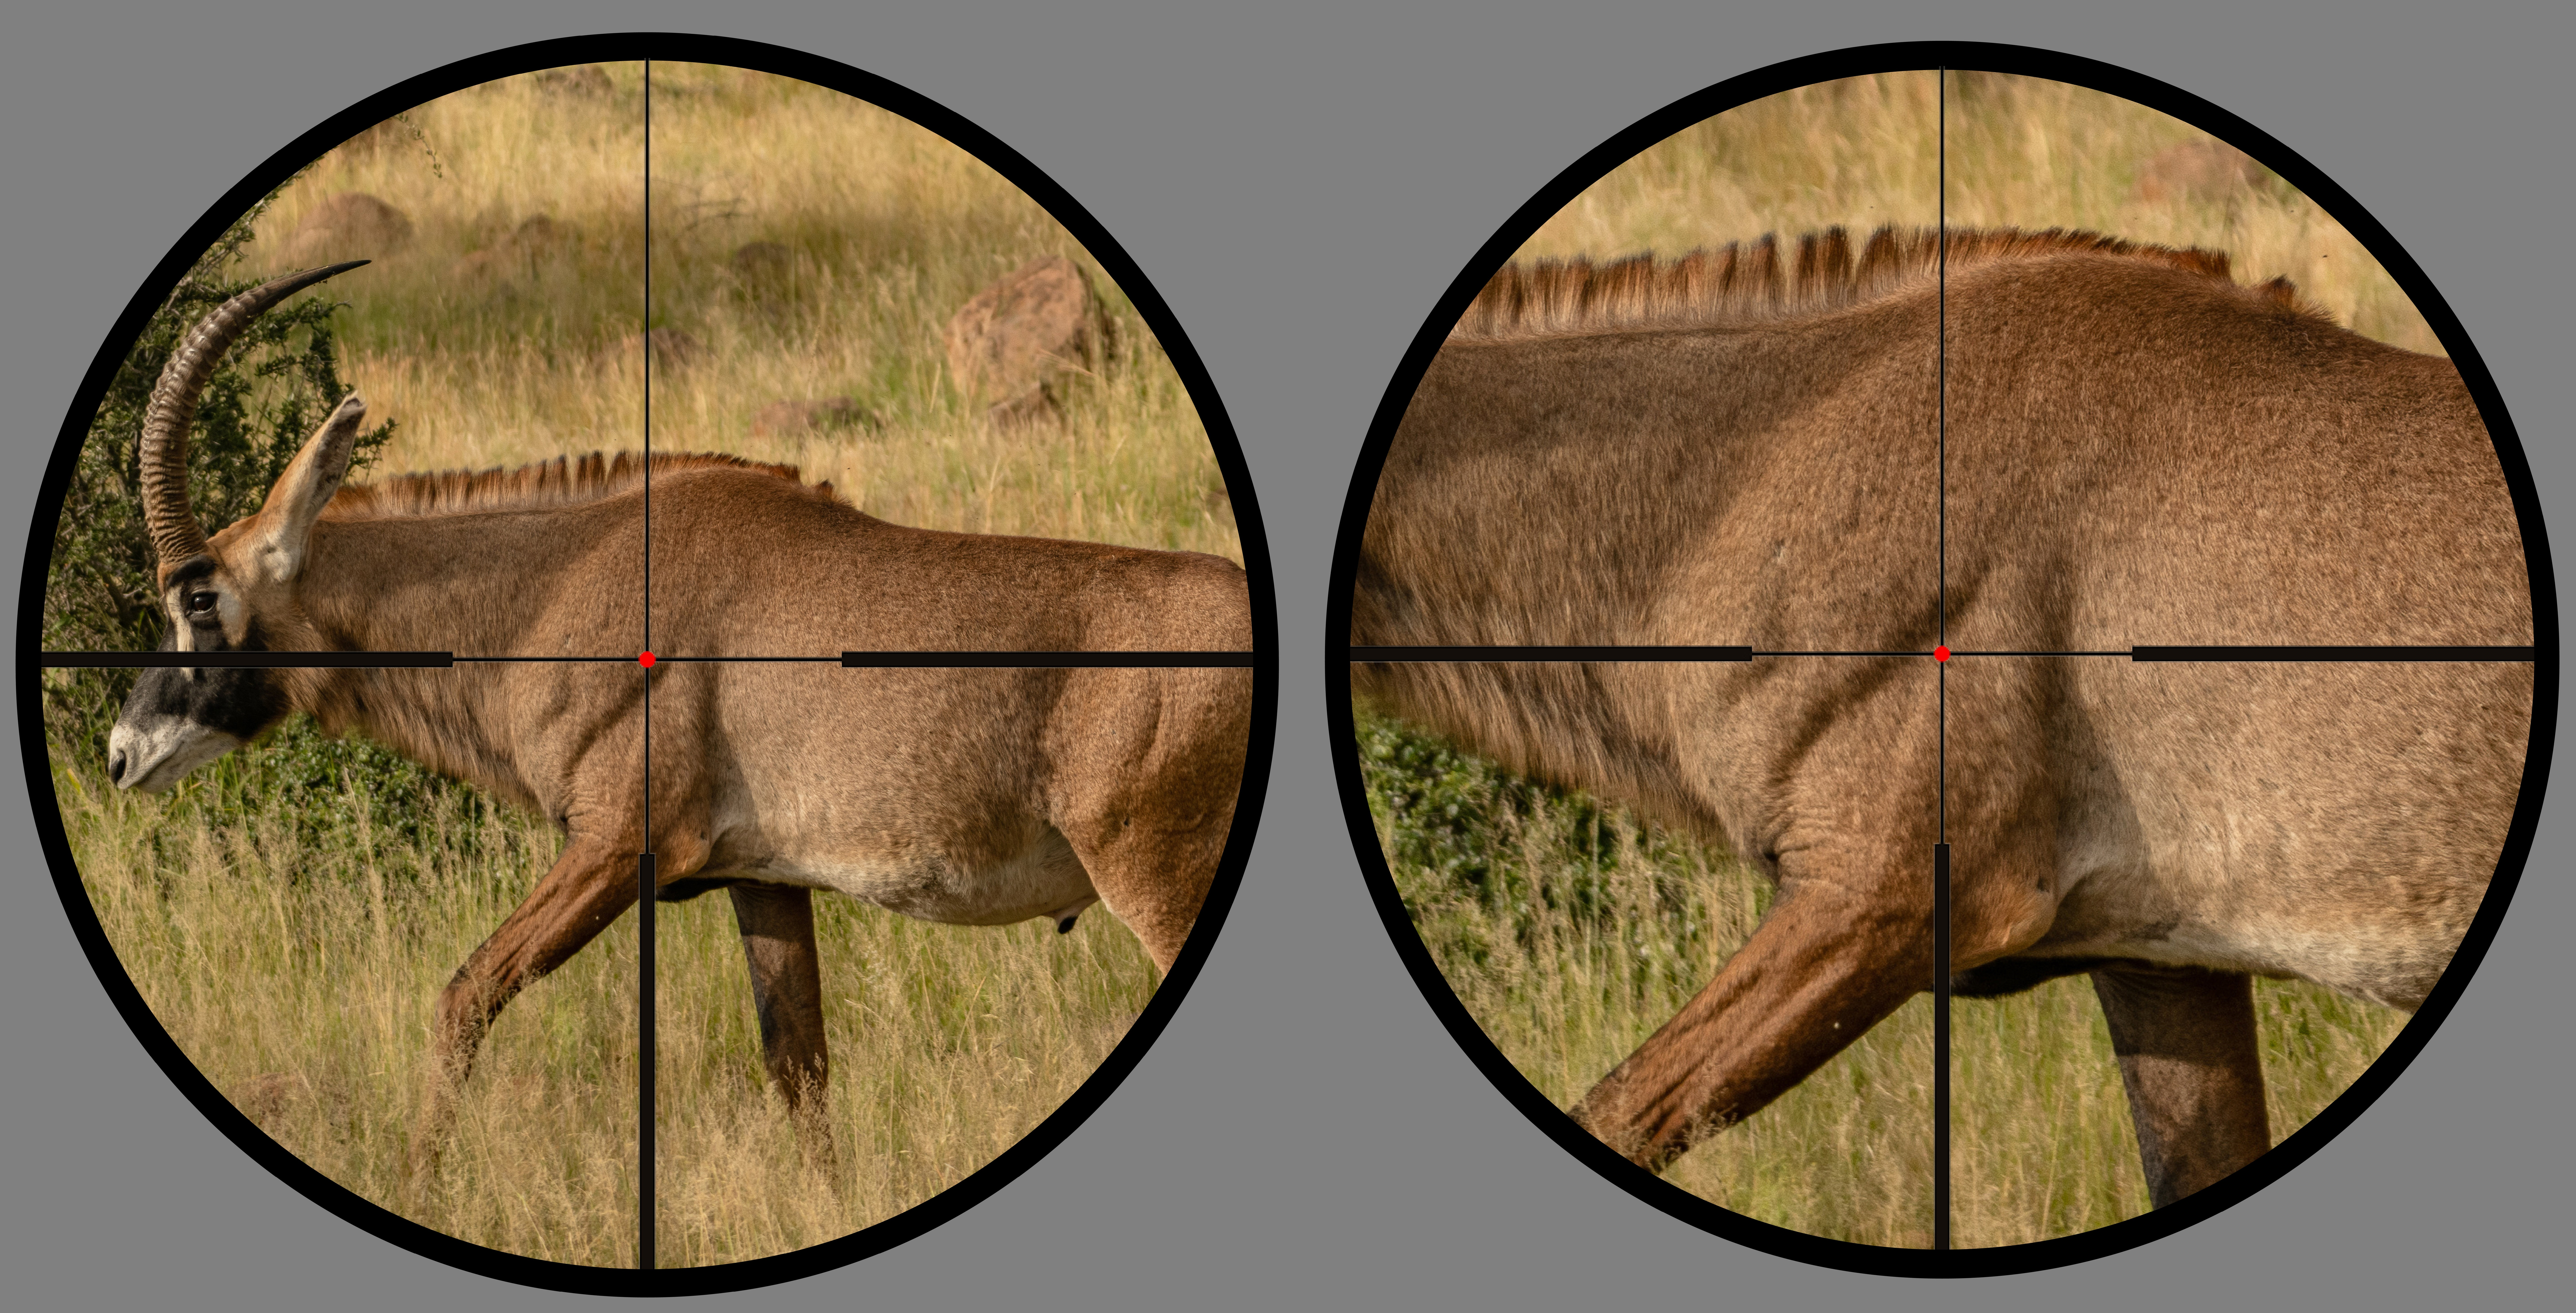 photo illustration showing a second focal place or sfp scope reticle